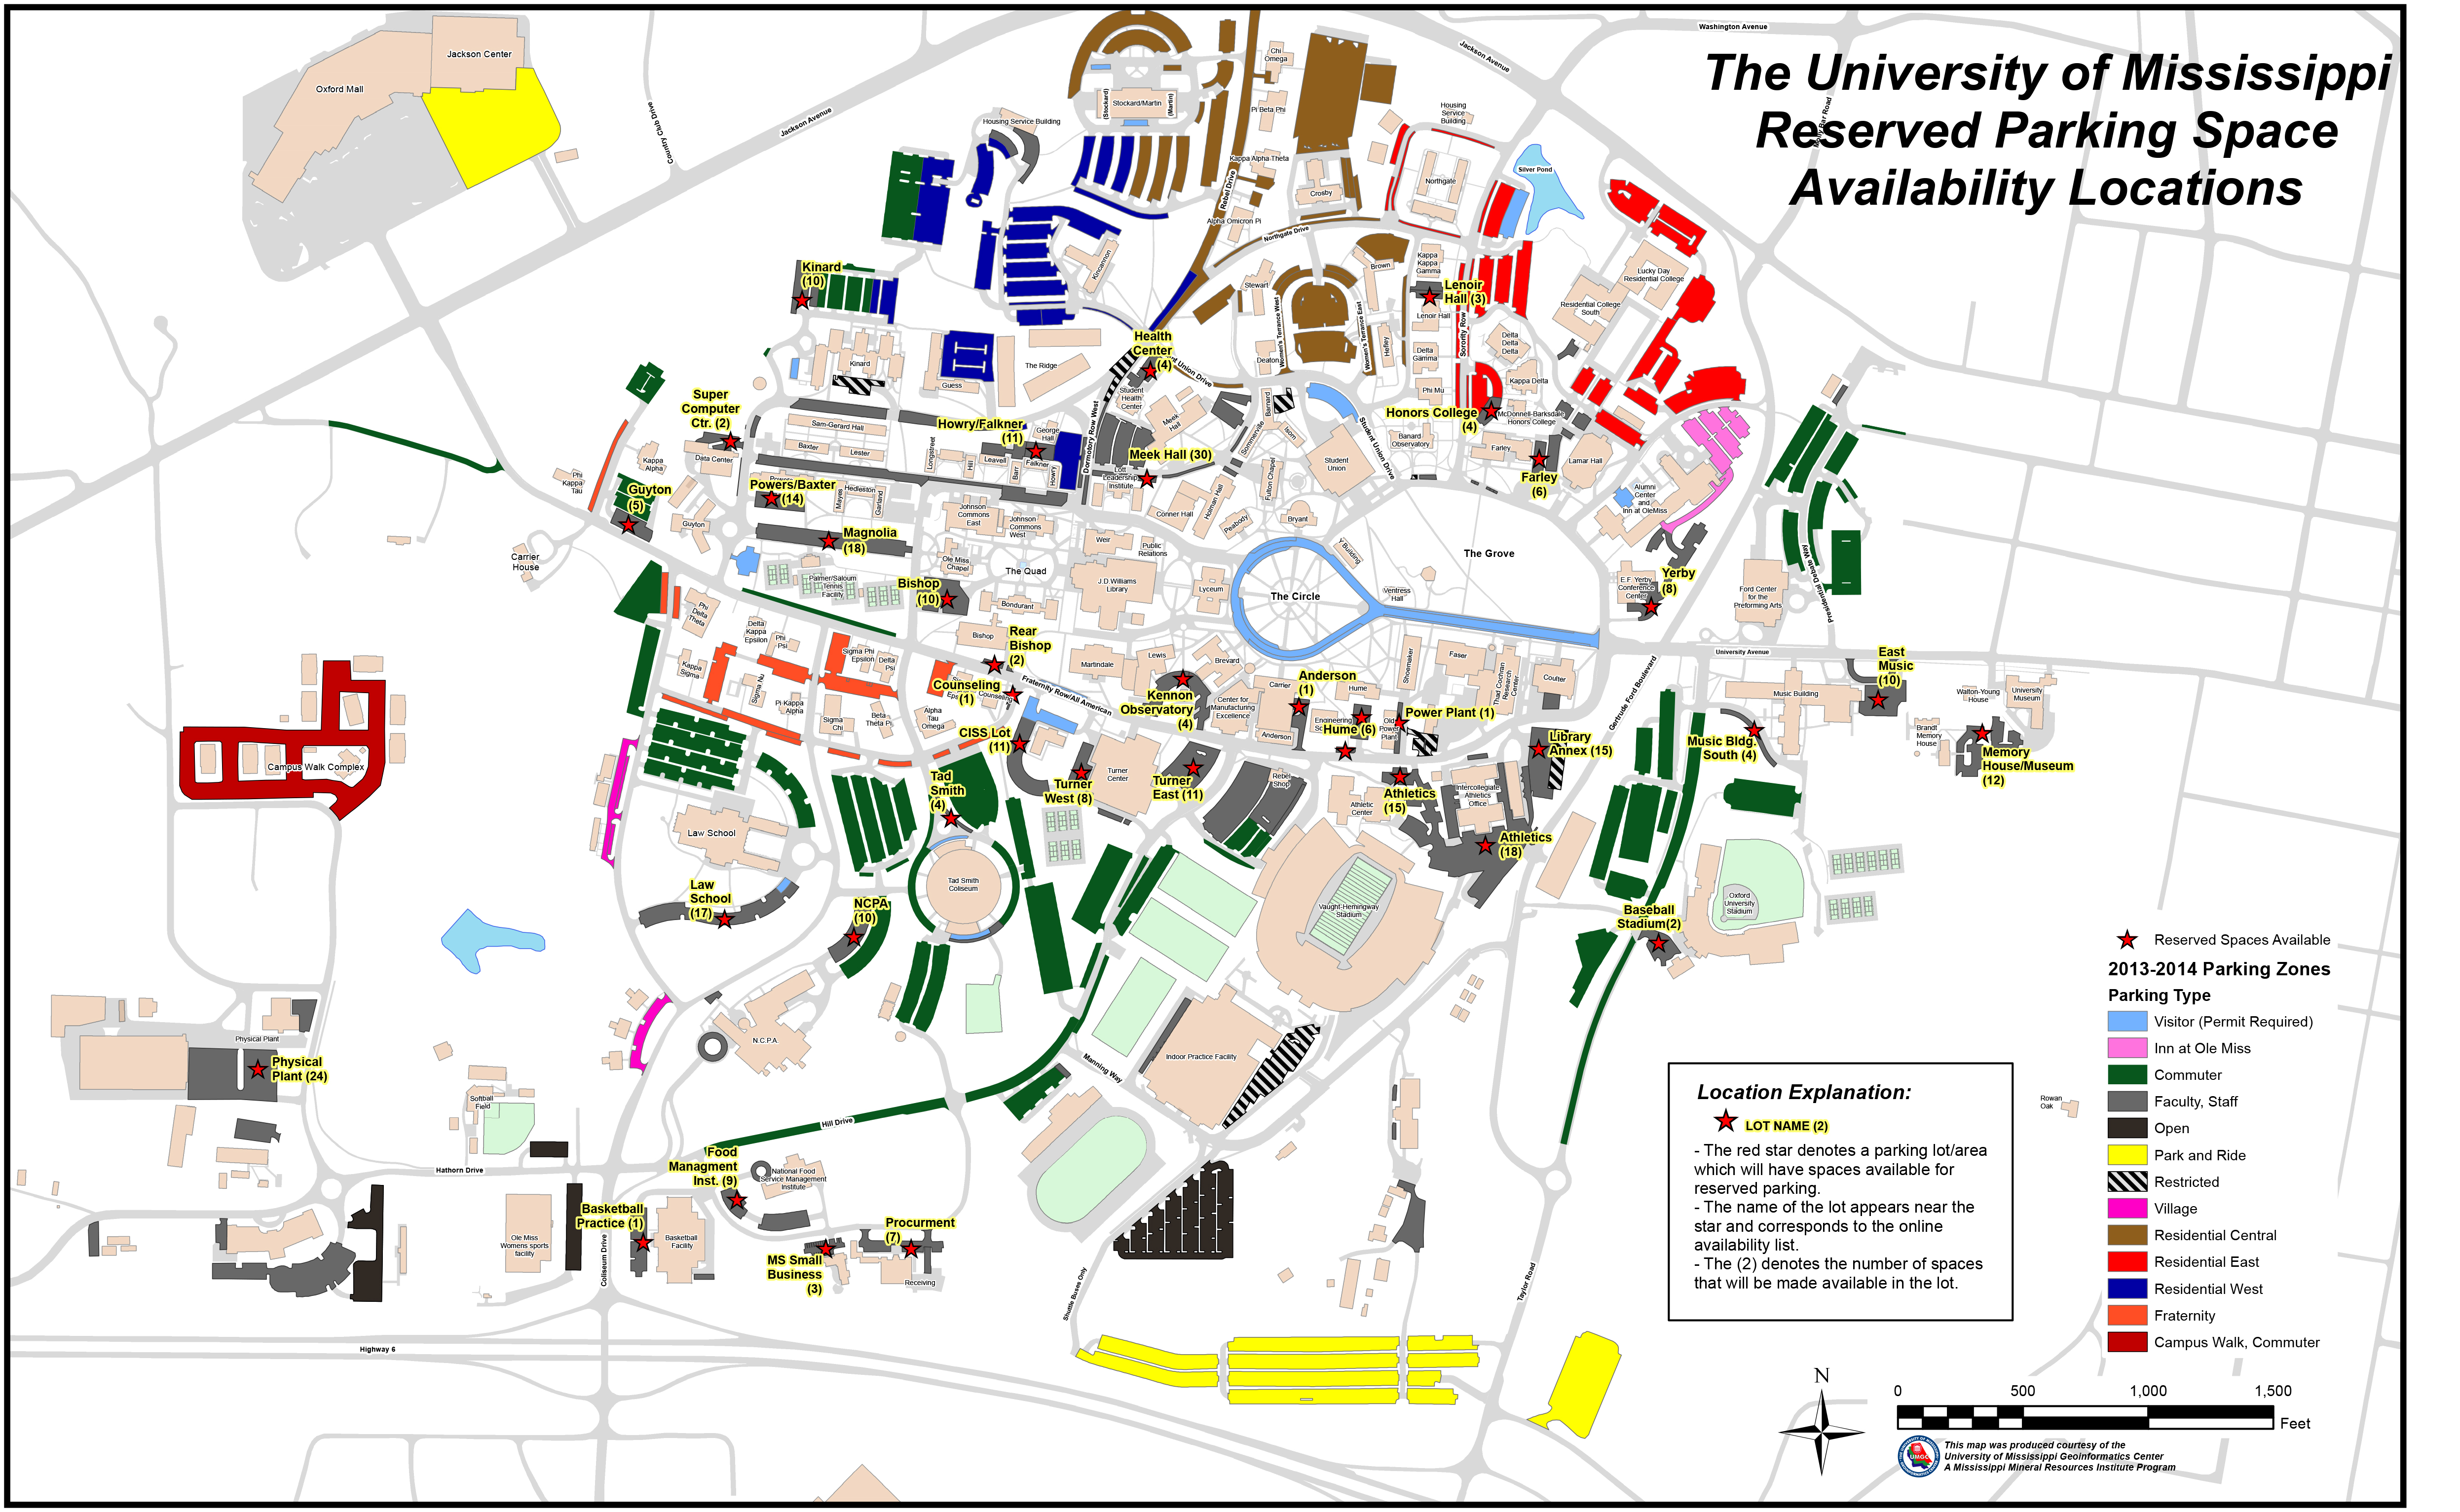 ole miss parking map 2013 Parking Zones Reserved Availability V2 Ole Miss News ole miss parking map